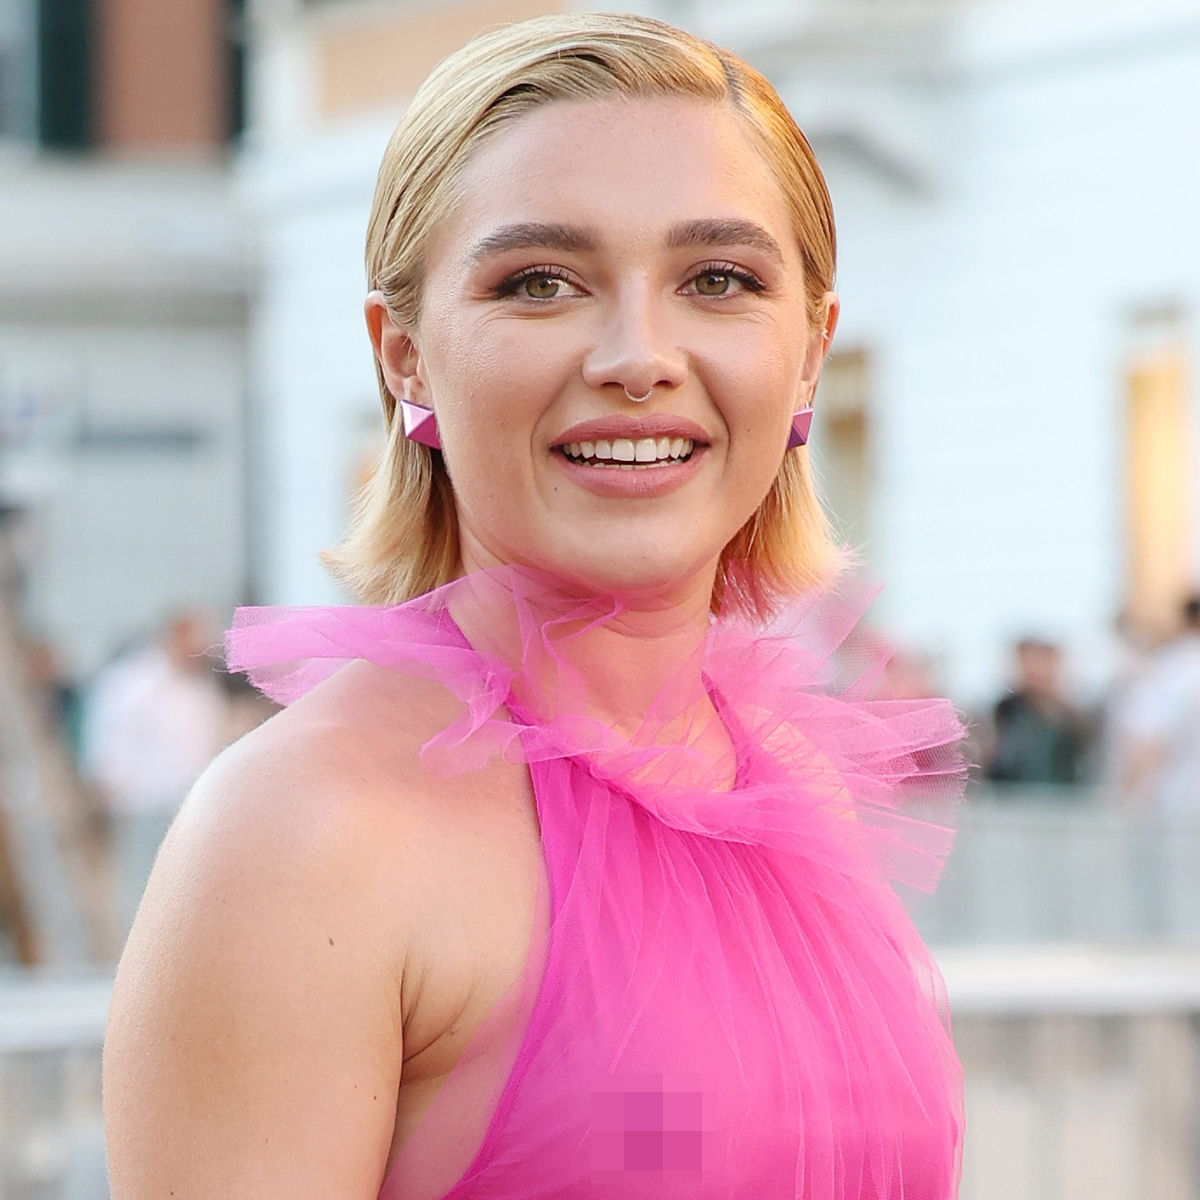 Florence Pugh’s “Edgy, Fearless Style” Helped Her Book a Beauty Gig